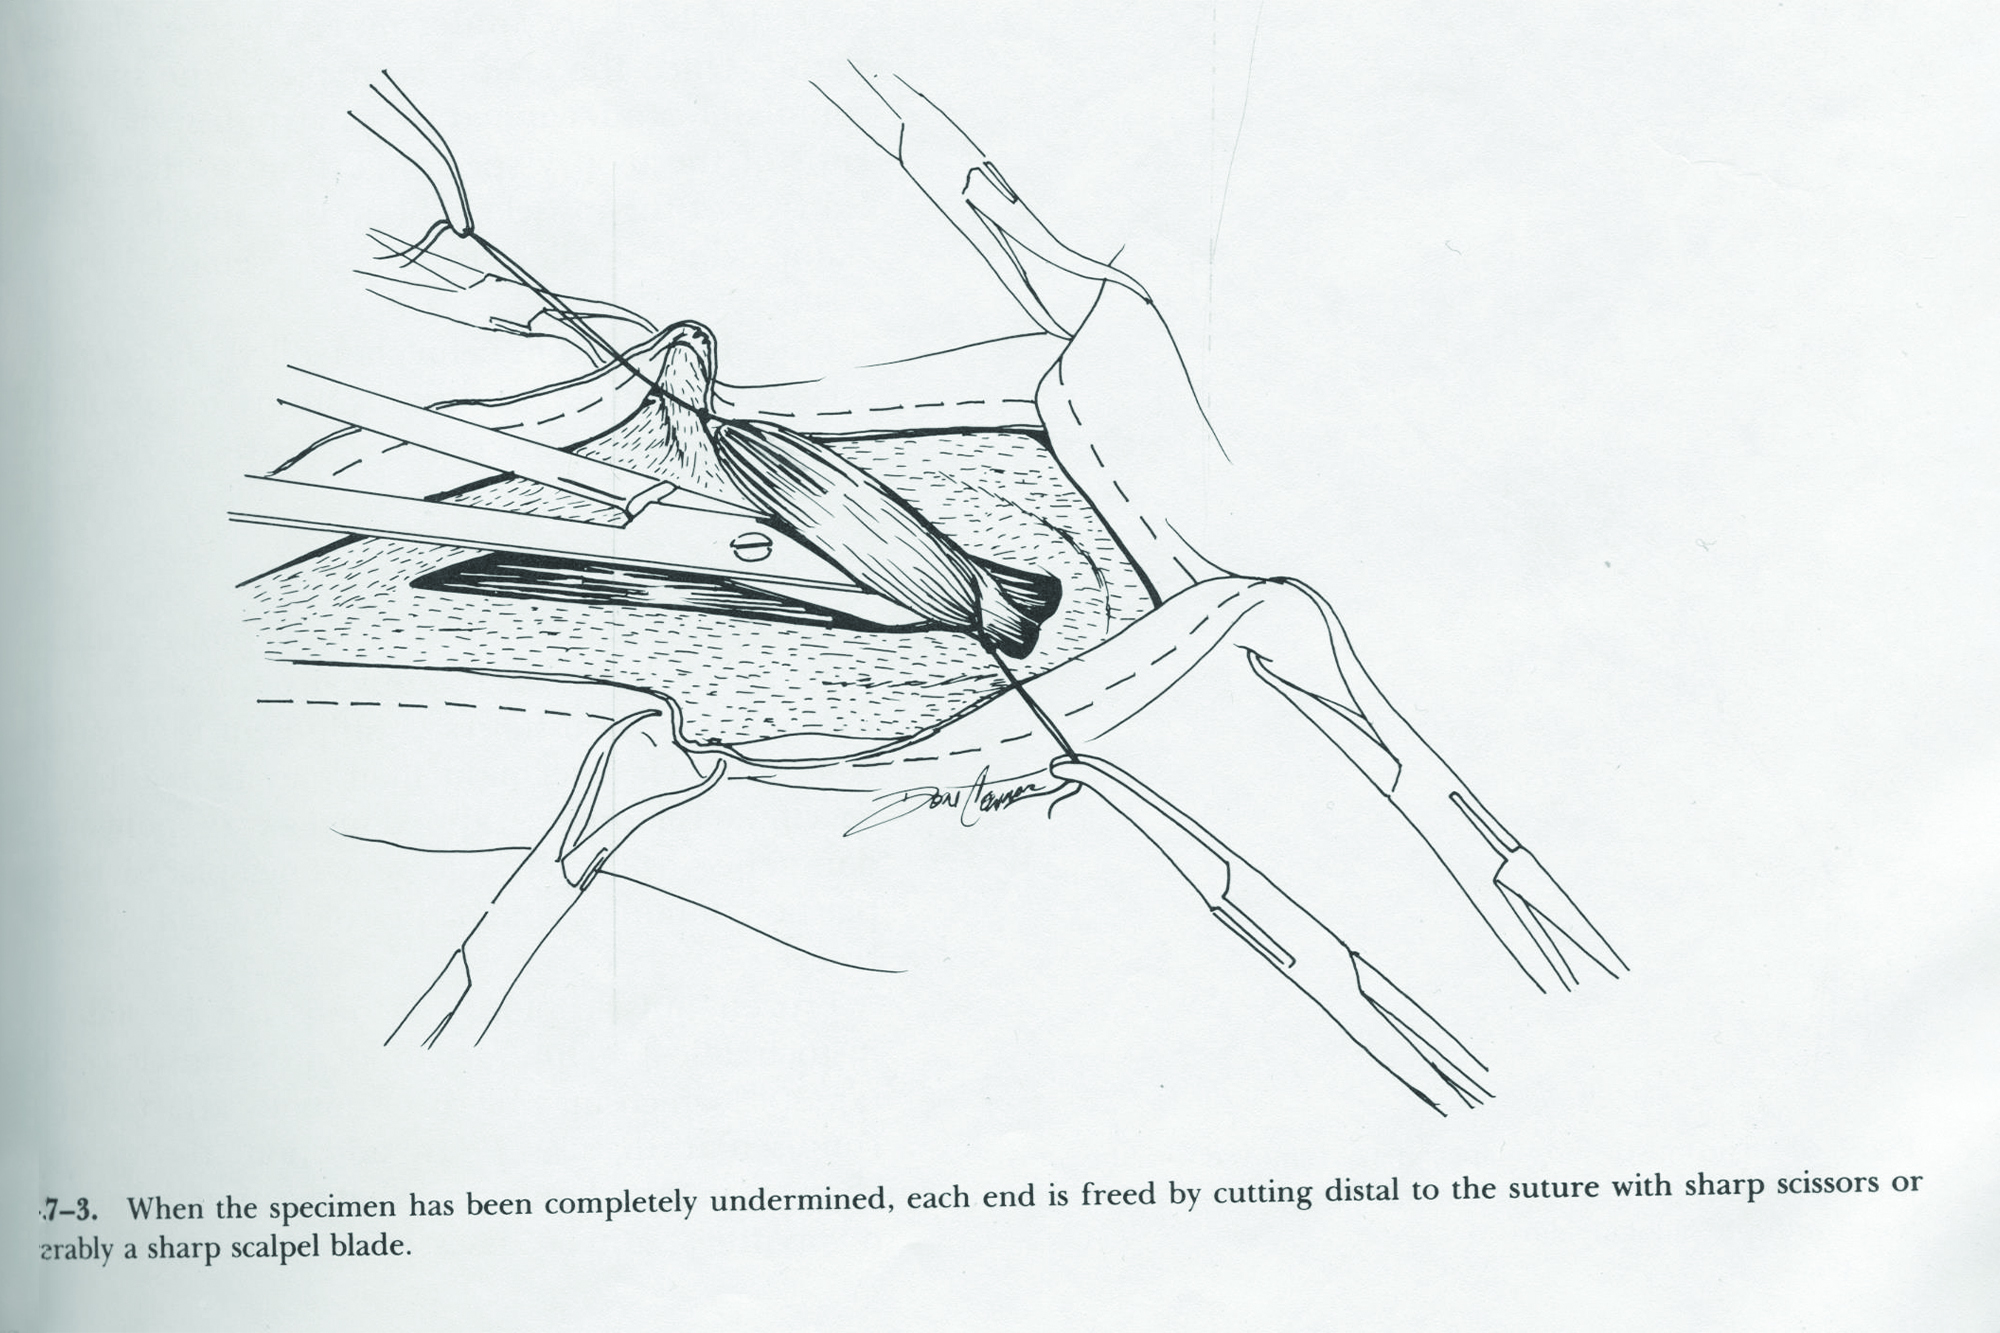 an illustration by don connor that appeared in a medical textbook.